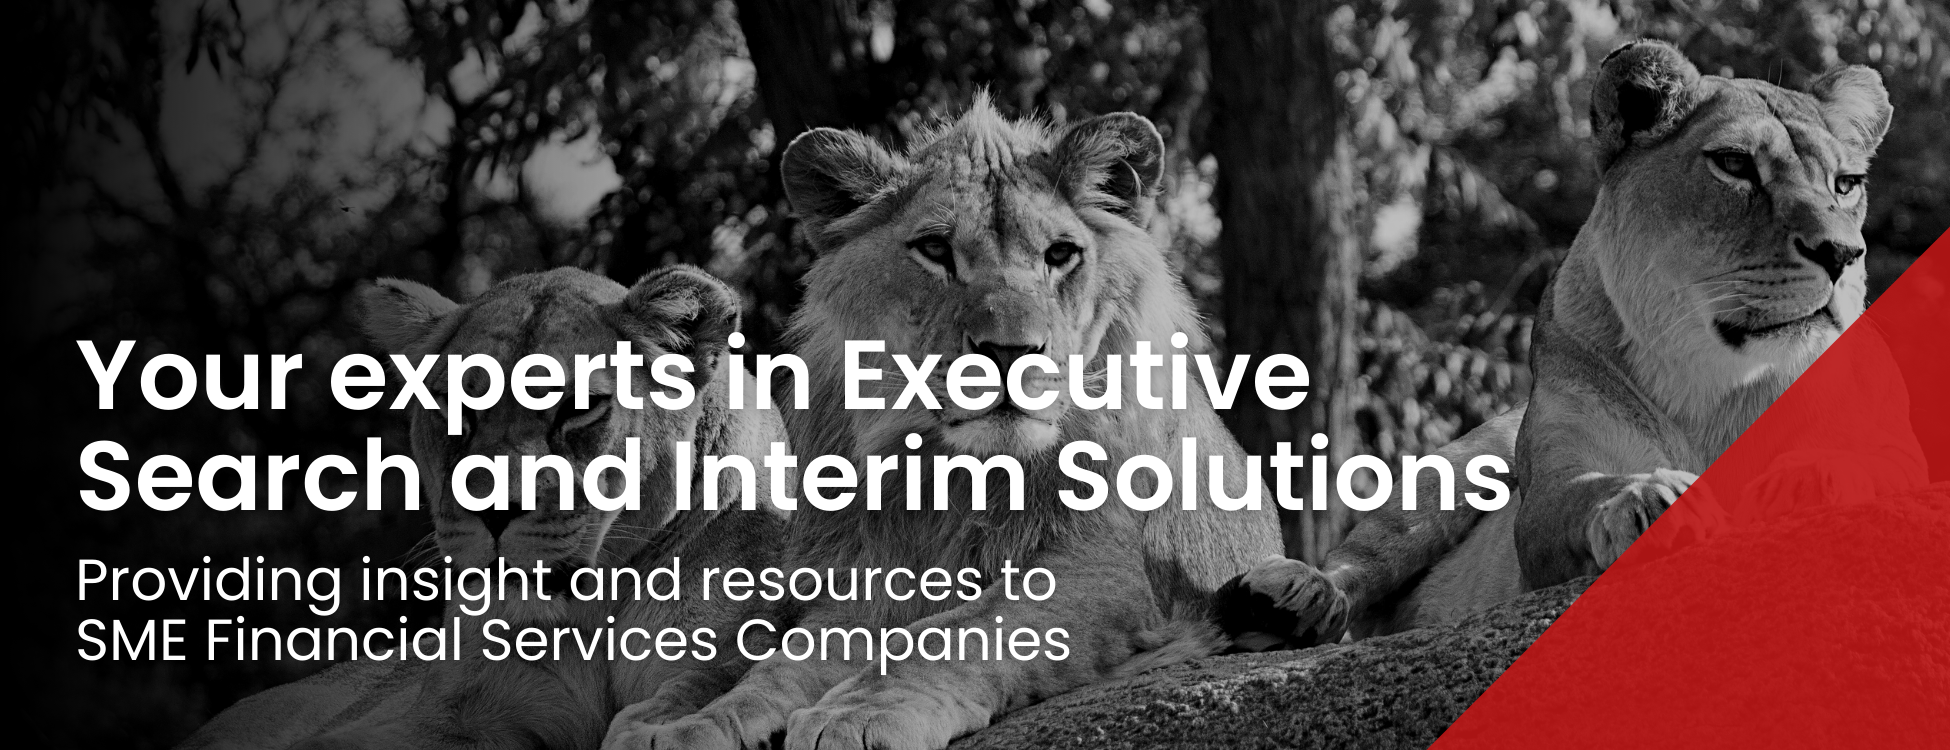 Your experts in Executive Search and Interim Solutions